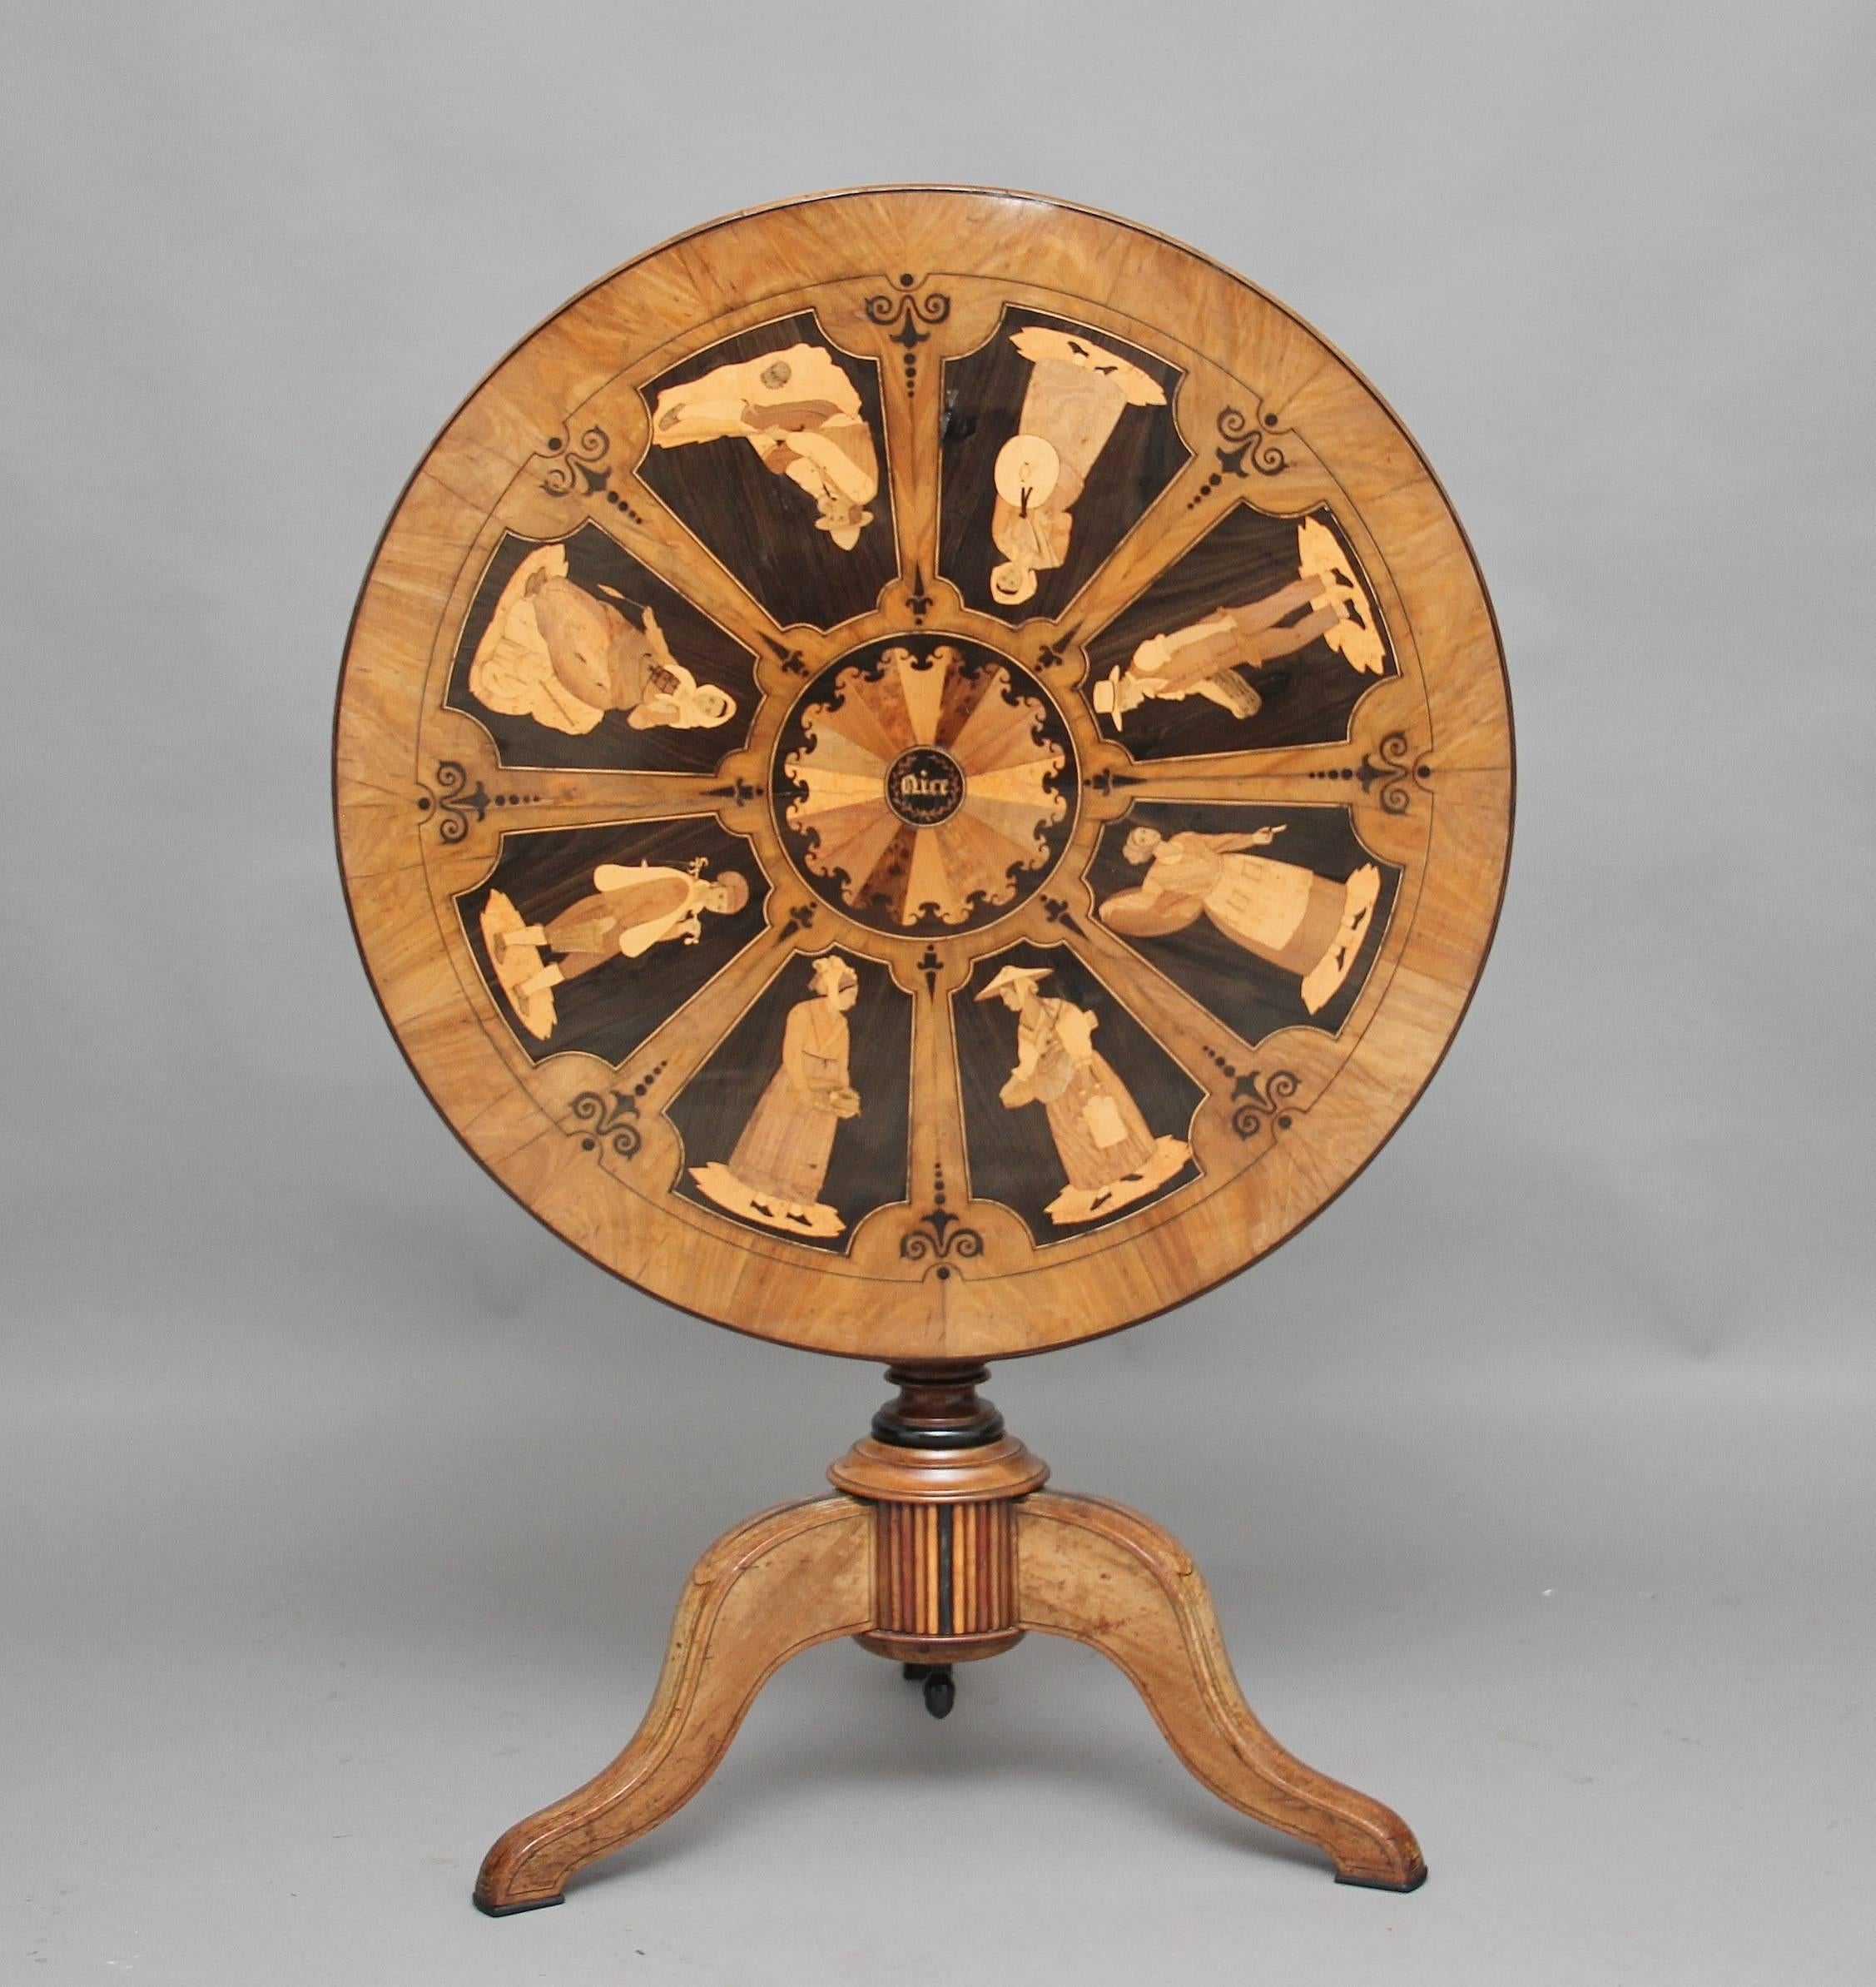 An exhibition quality 19th century Sorrento marquetry tripod table, the table is made from olive wood, ebony and other exotic woods, the top inlaid with eight figures of various country folk of the region, the center of the top having a circular